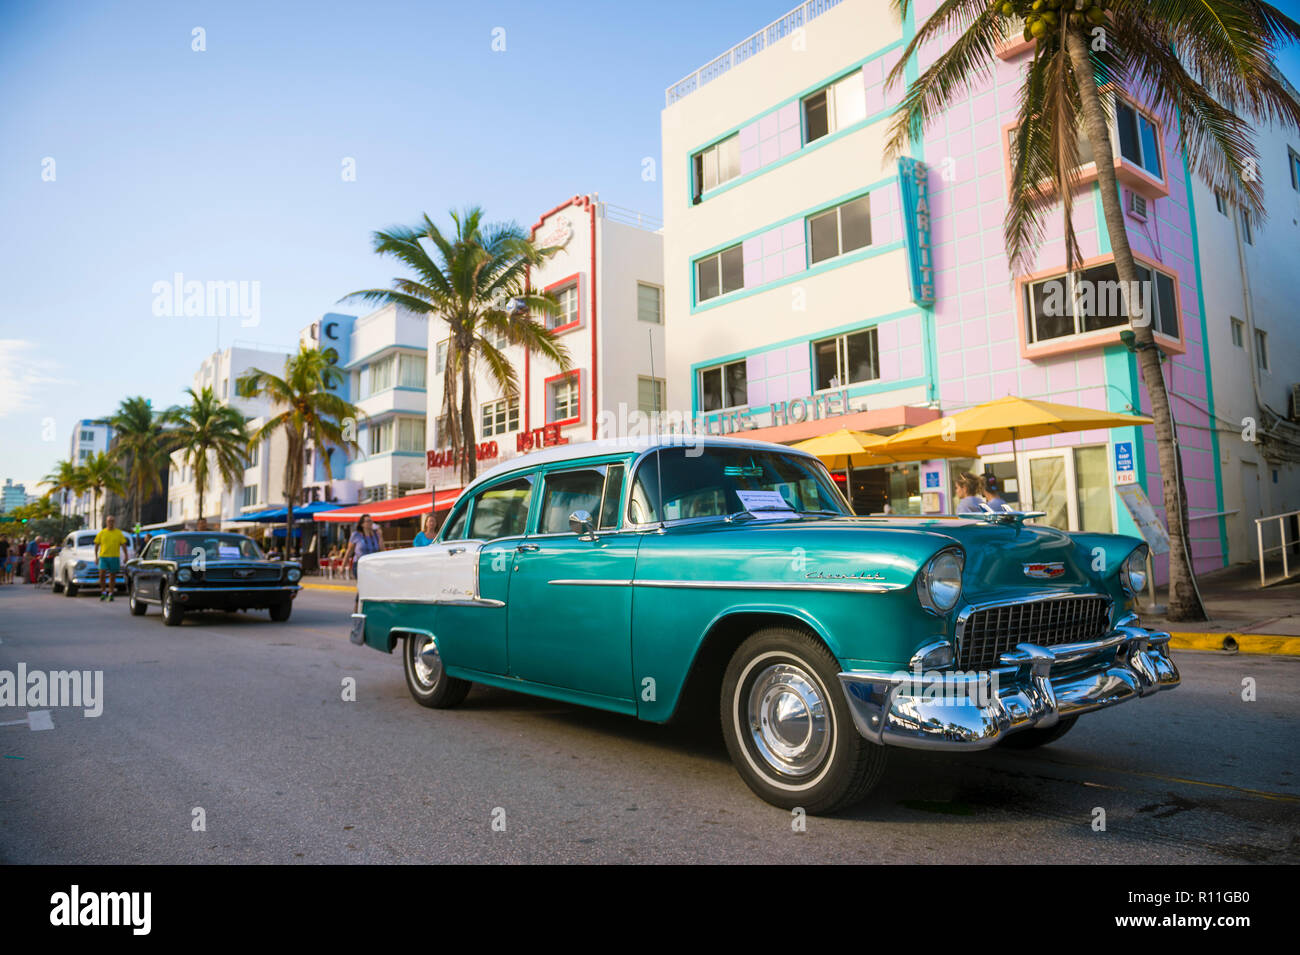 MIAMI - CIRCA JANUARY, 2018: A line of classic cars stand parked on front of iconic colorful Art Deco architecture on Ocean Drive. Stock Photo